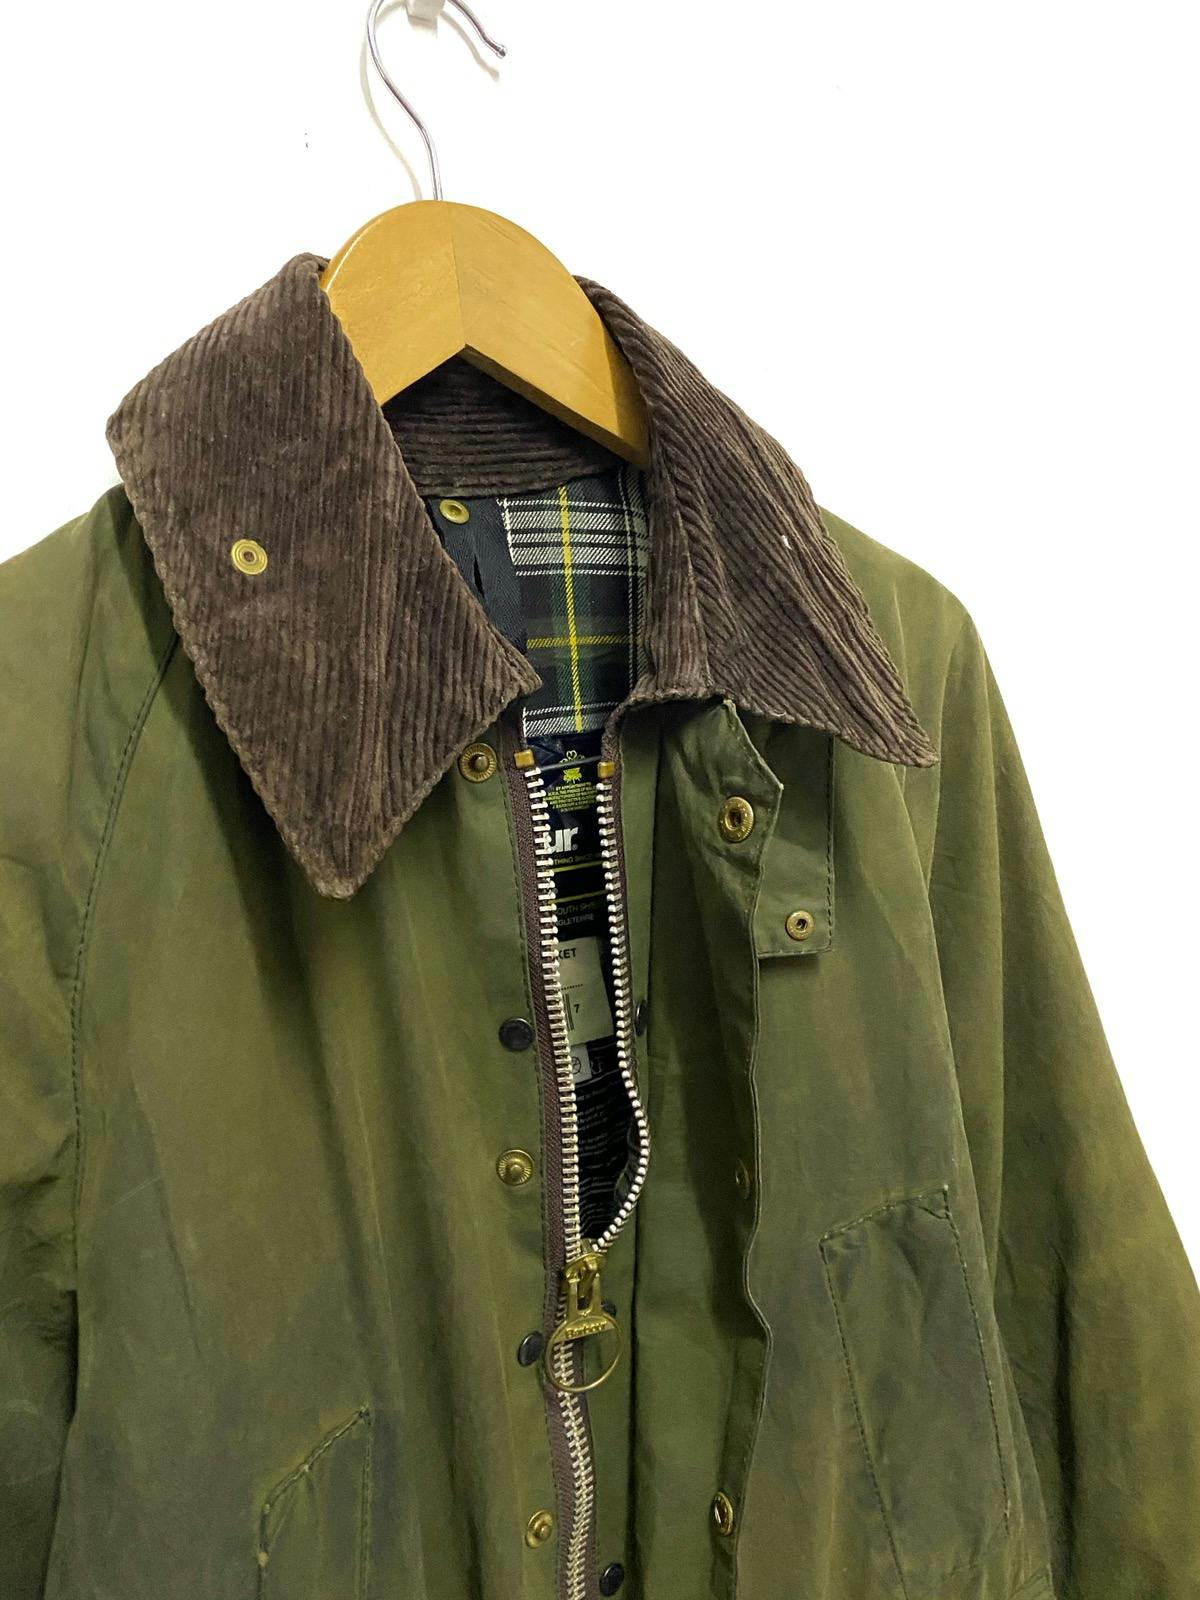 Barbour Bedale A100 Wax Jacket Made in England - 6